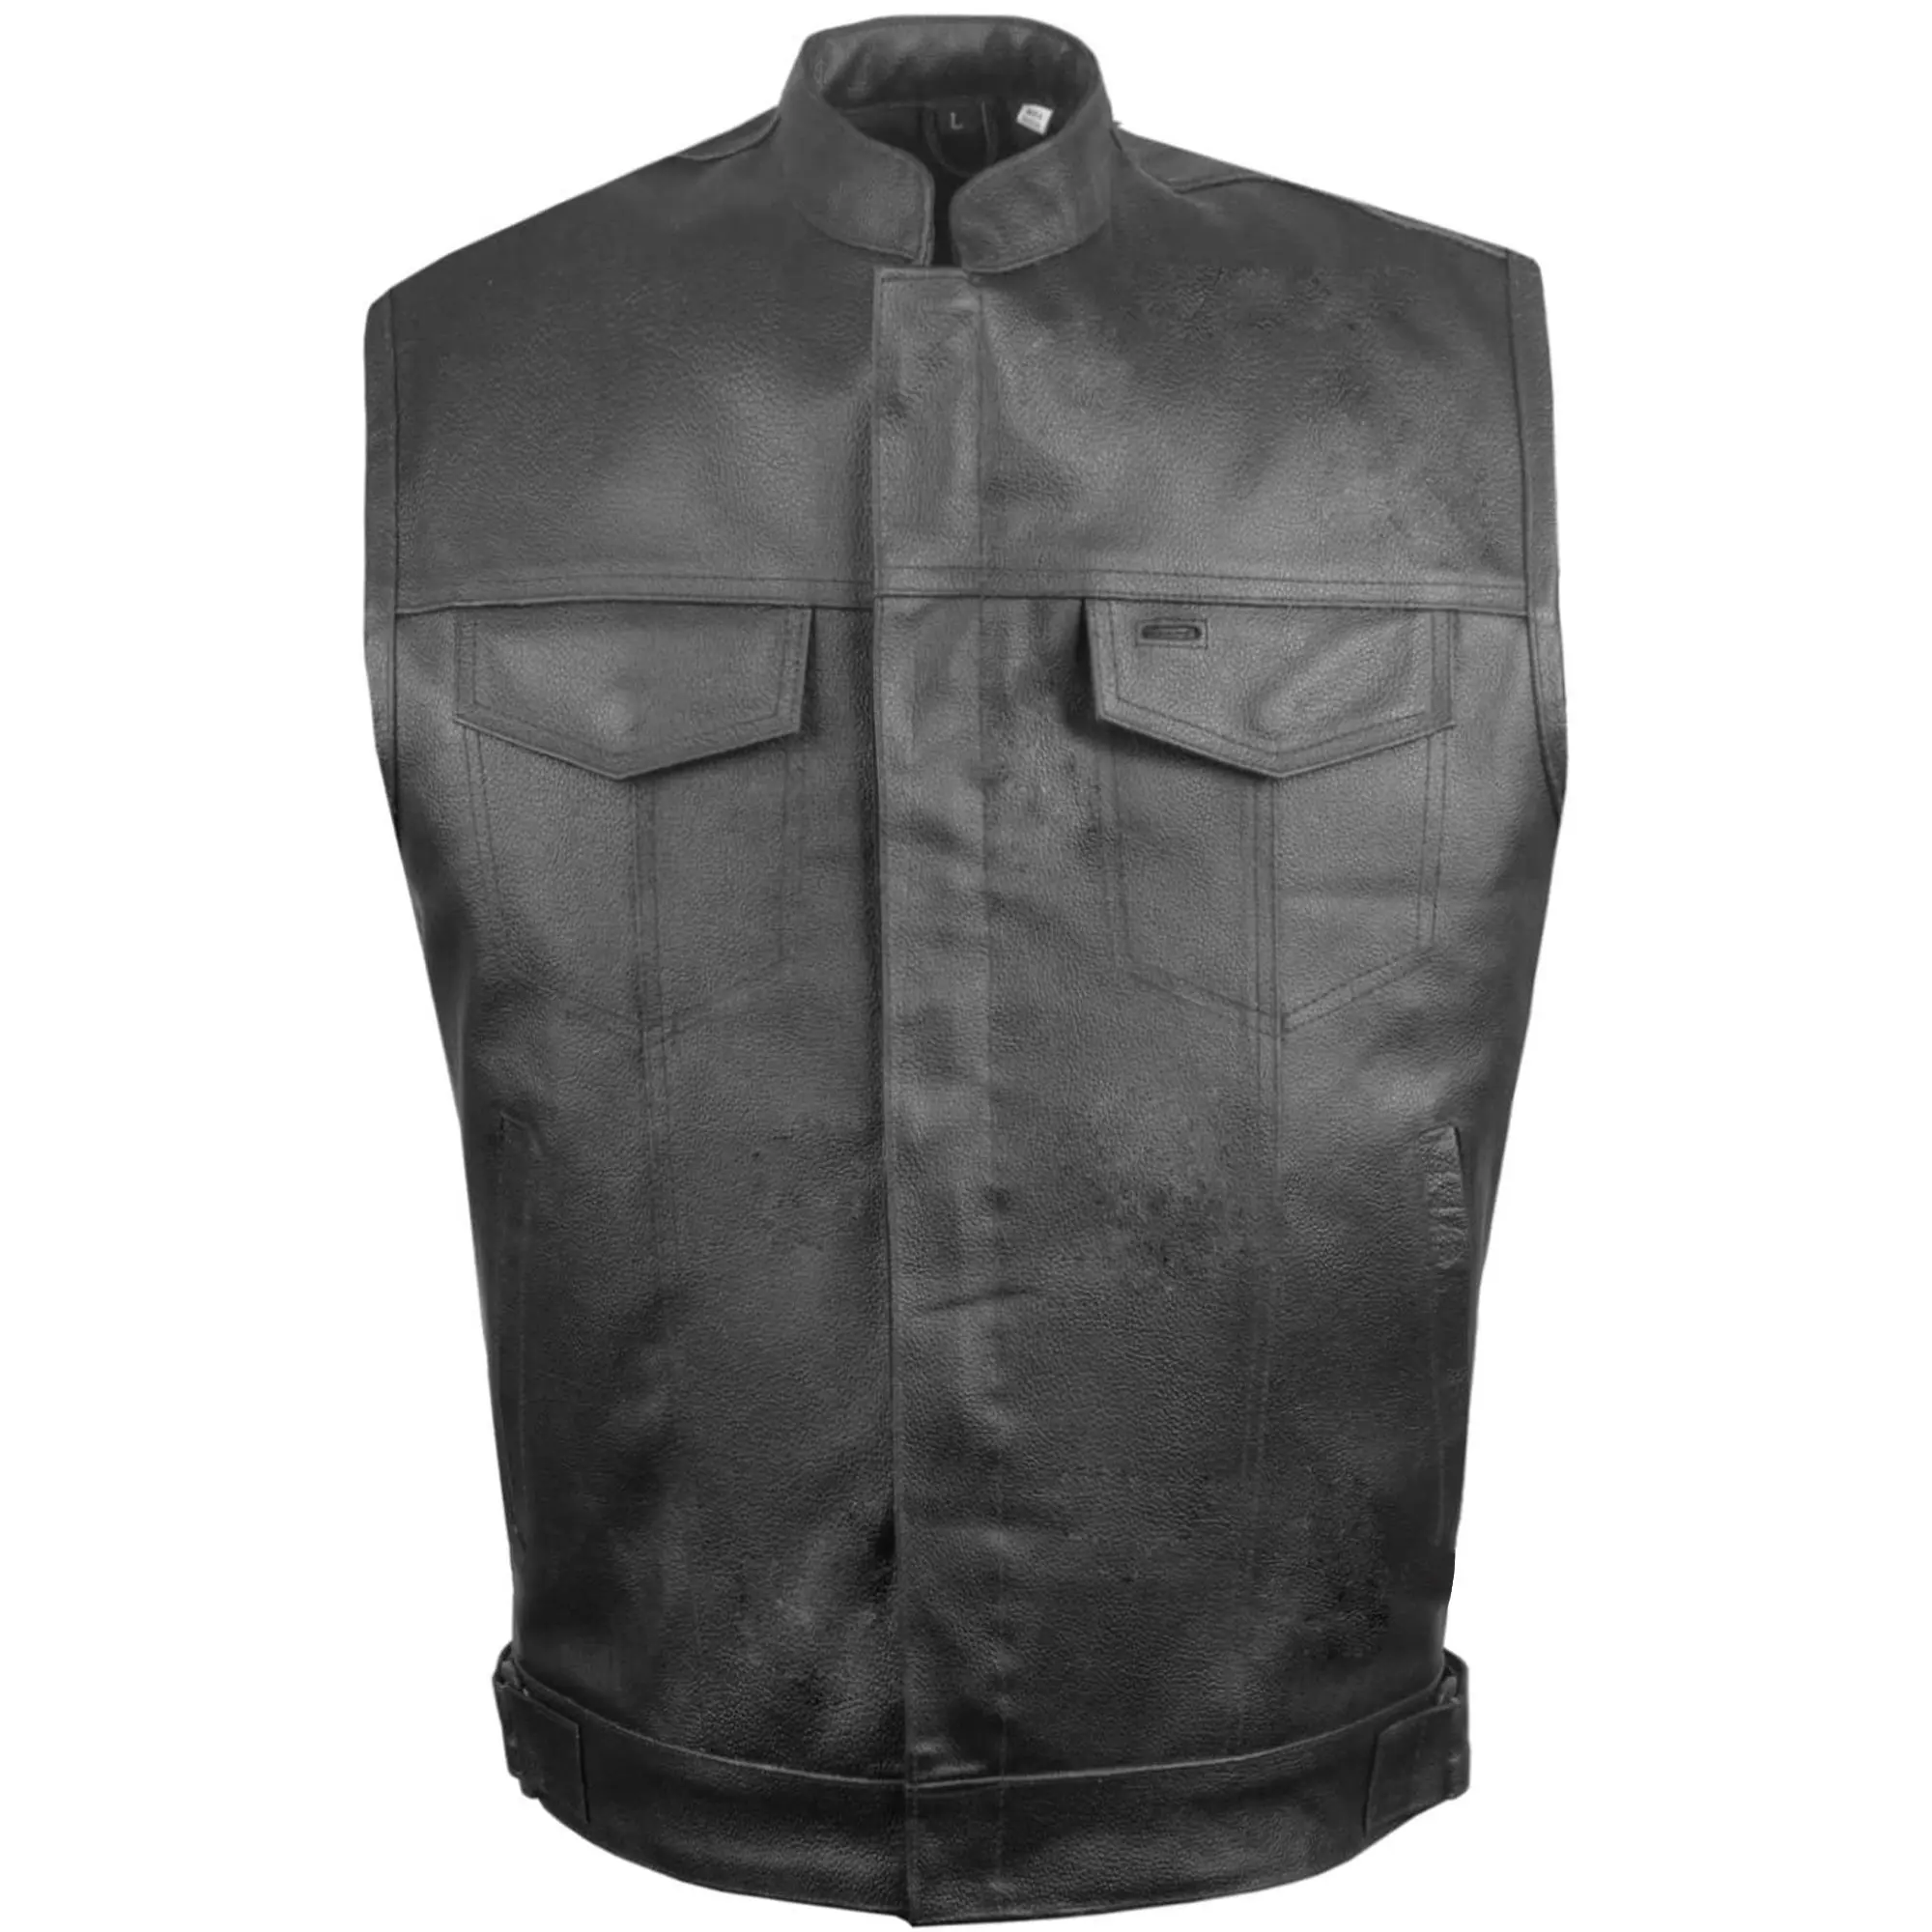 VINTAGE Men's Leather Motorcycle Concealed Gun Pockets Biker Club Vest Cruise Cowhide Leather Two Chest & Waist Pockets